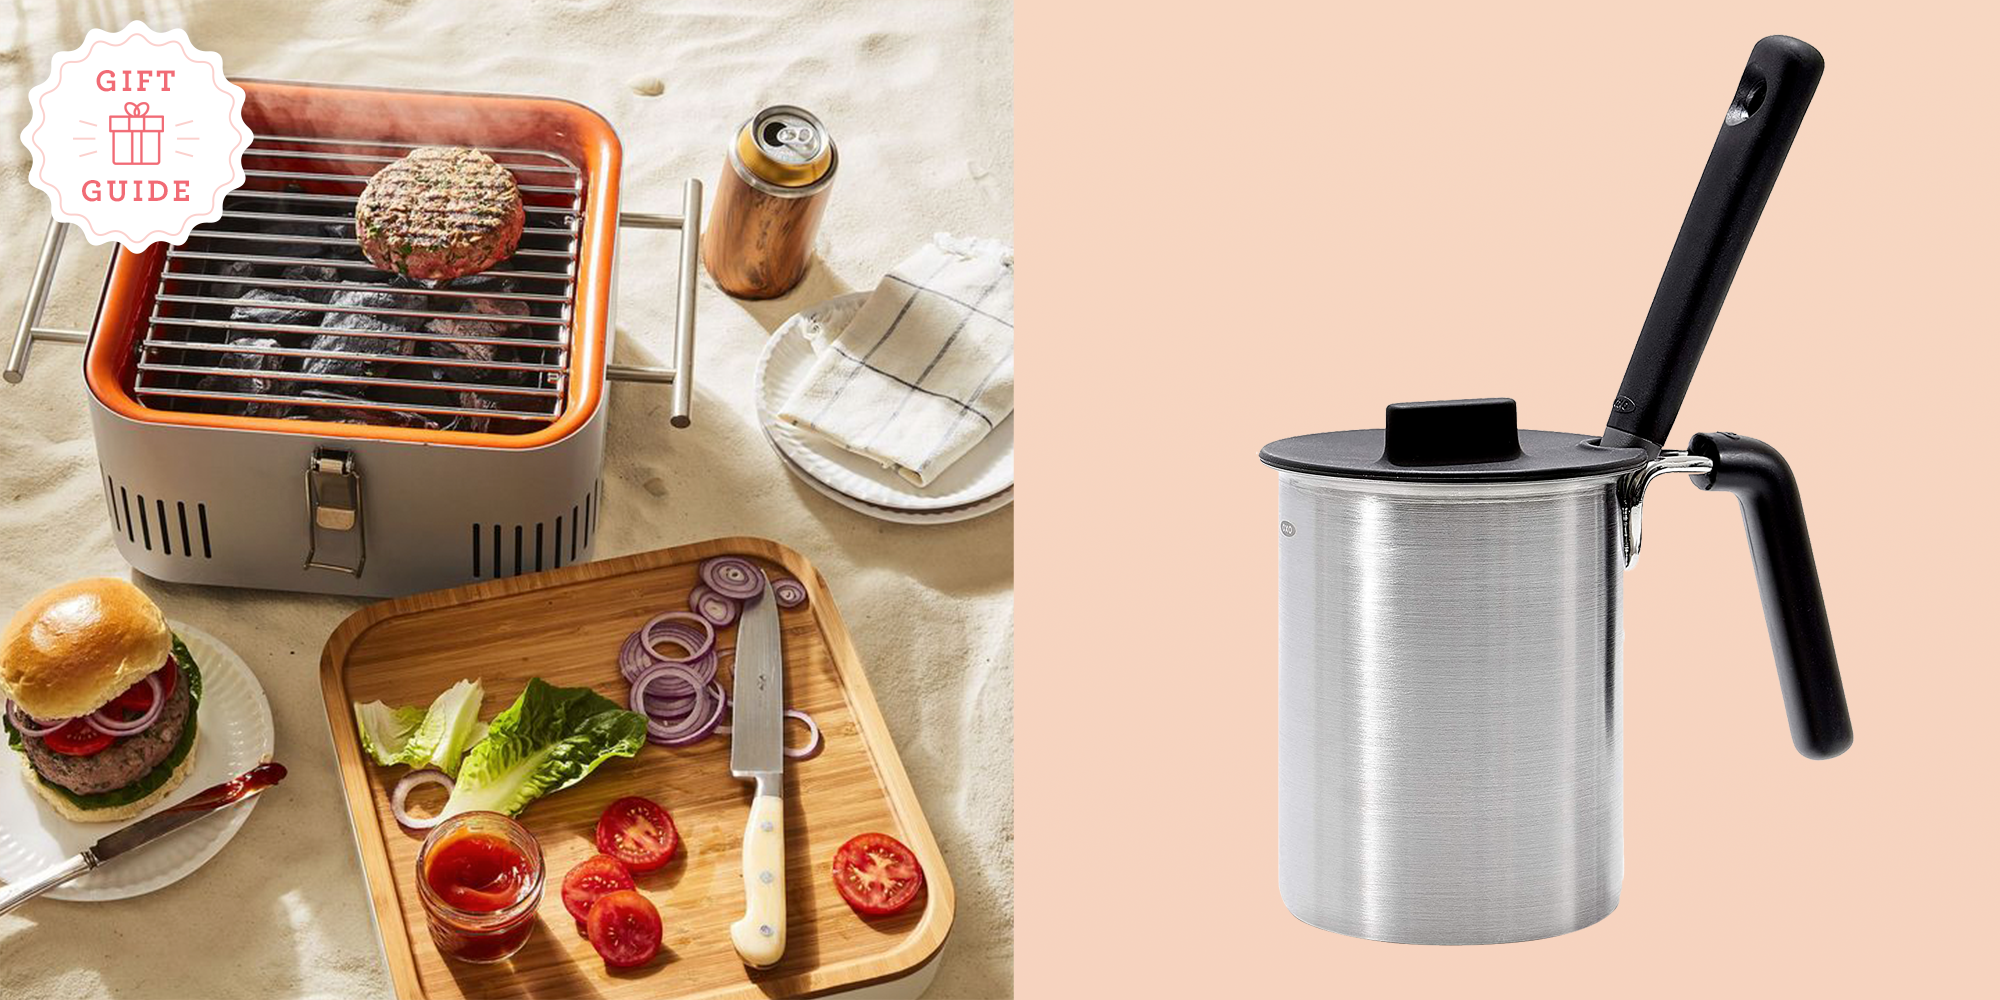 38 Best Grilling Gifts 2022 - Luxury 